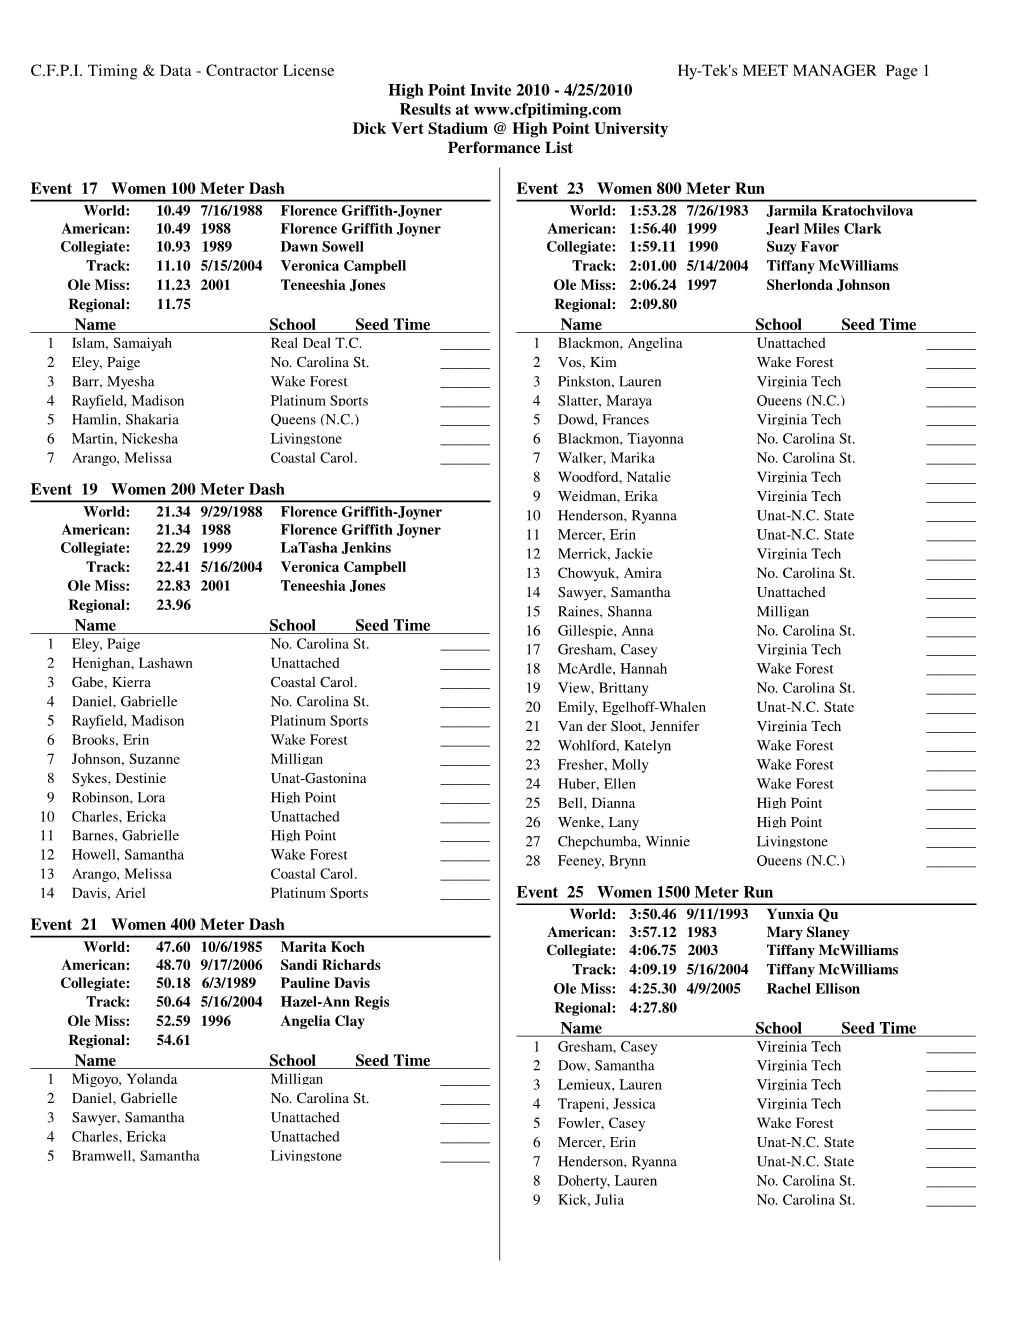 Performance List of Entries